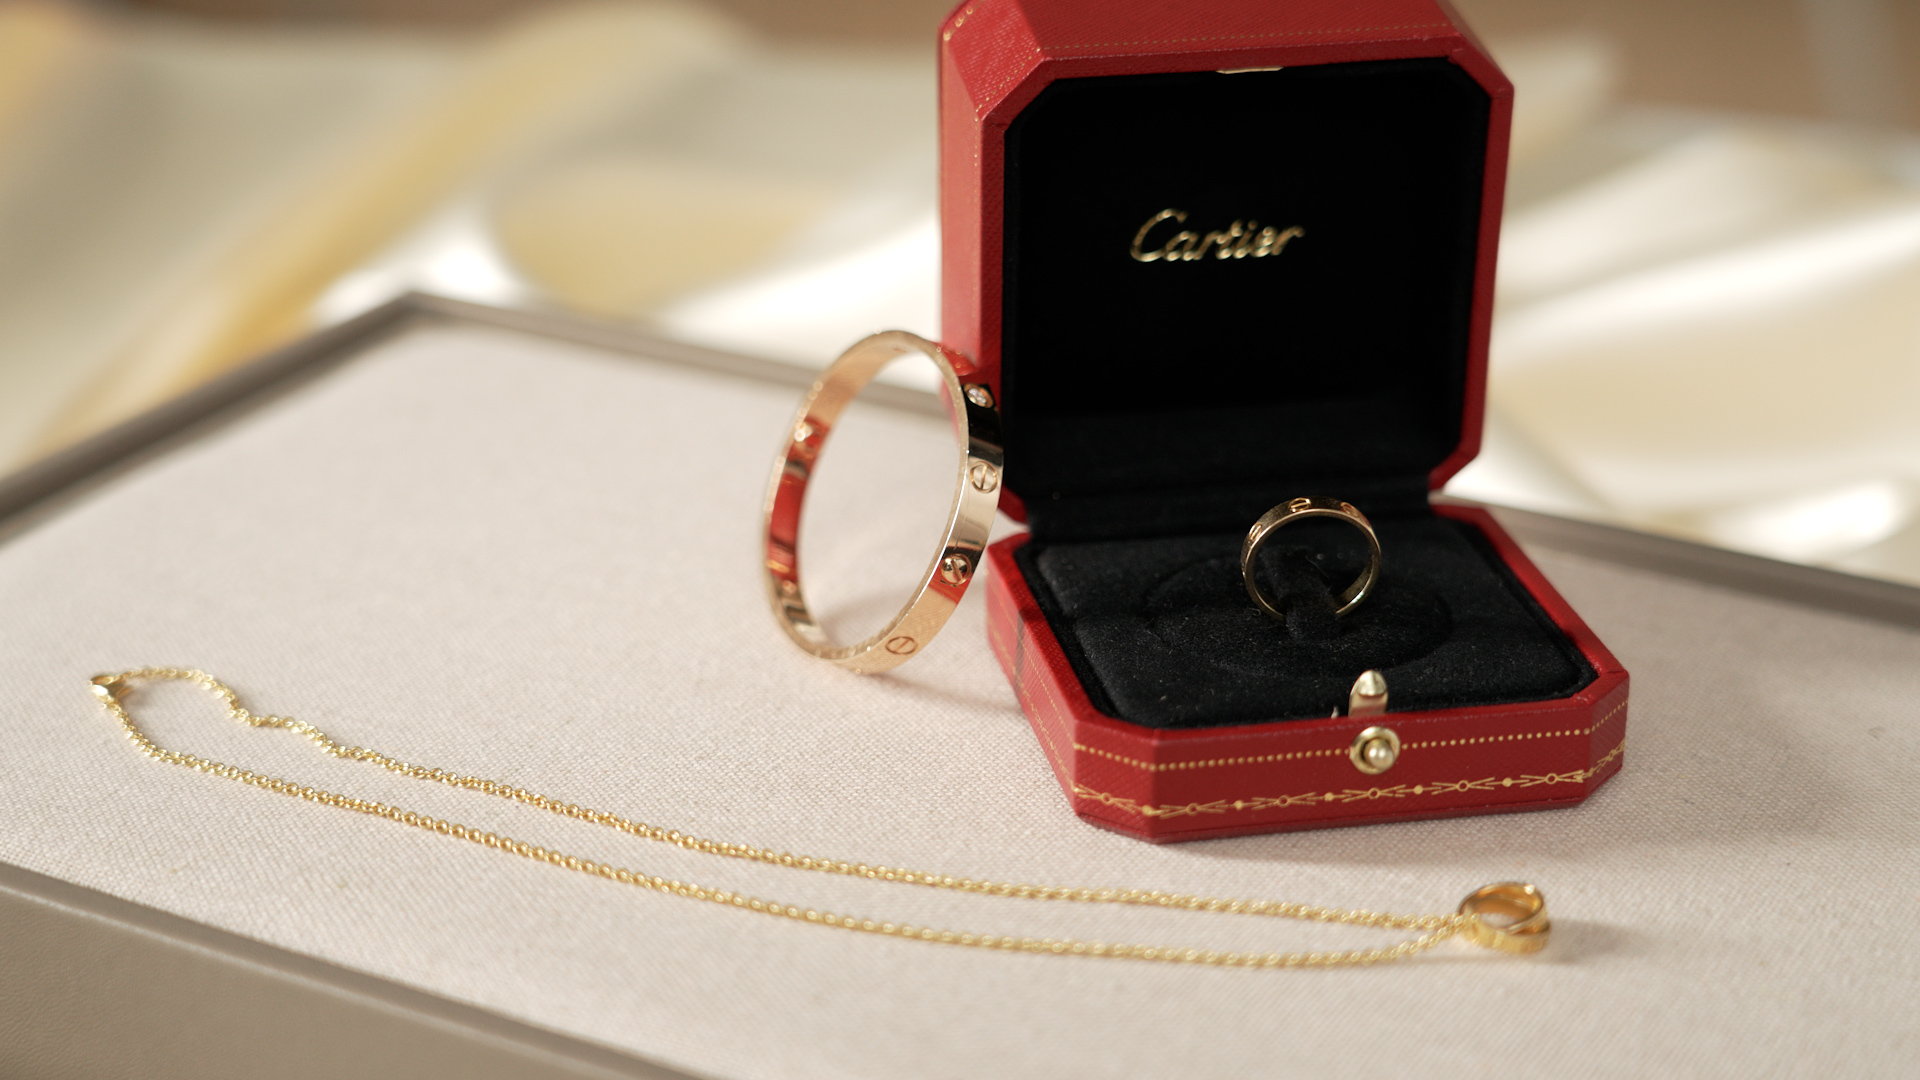 Iconic jewelry, episode 1: The Love bracelet by Cartier